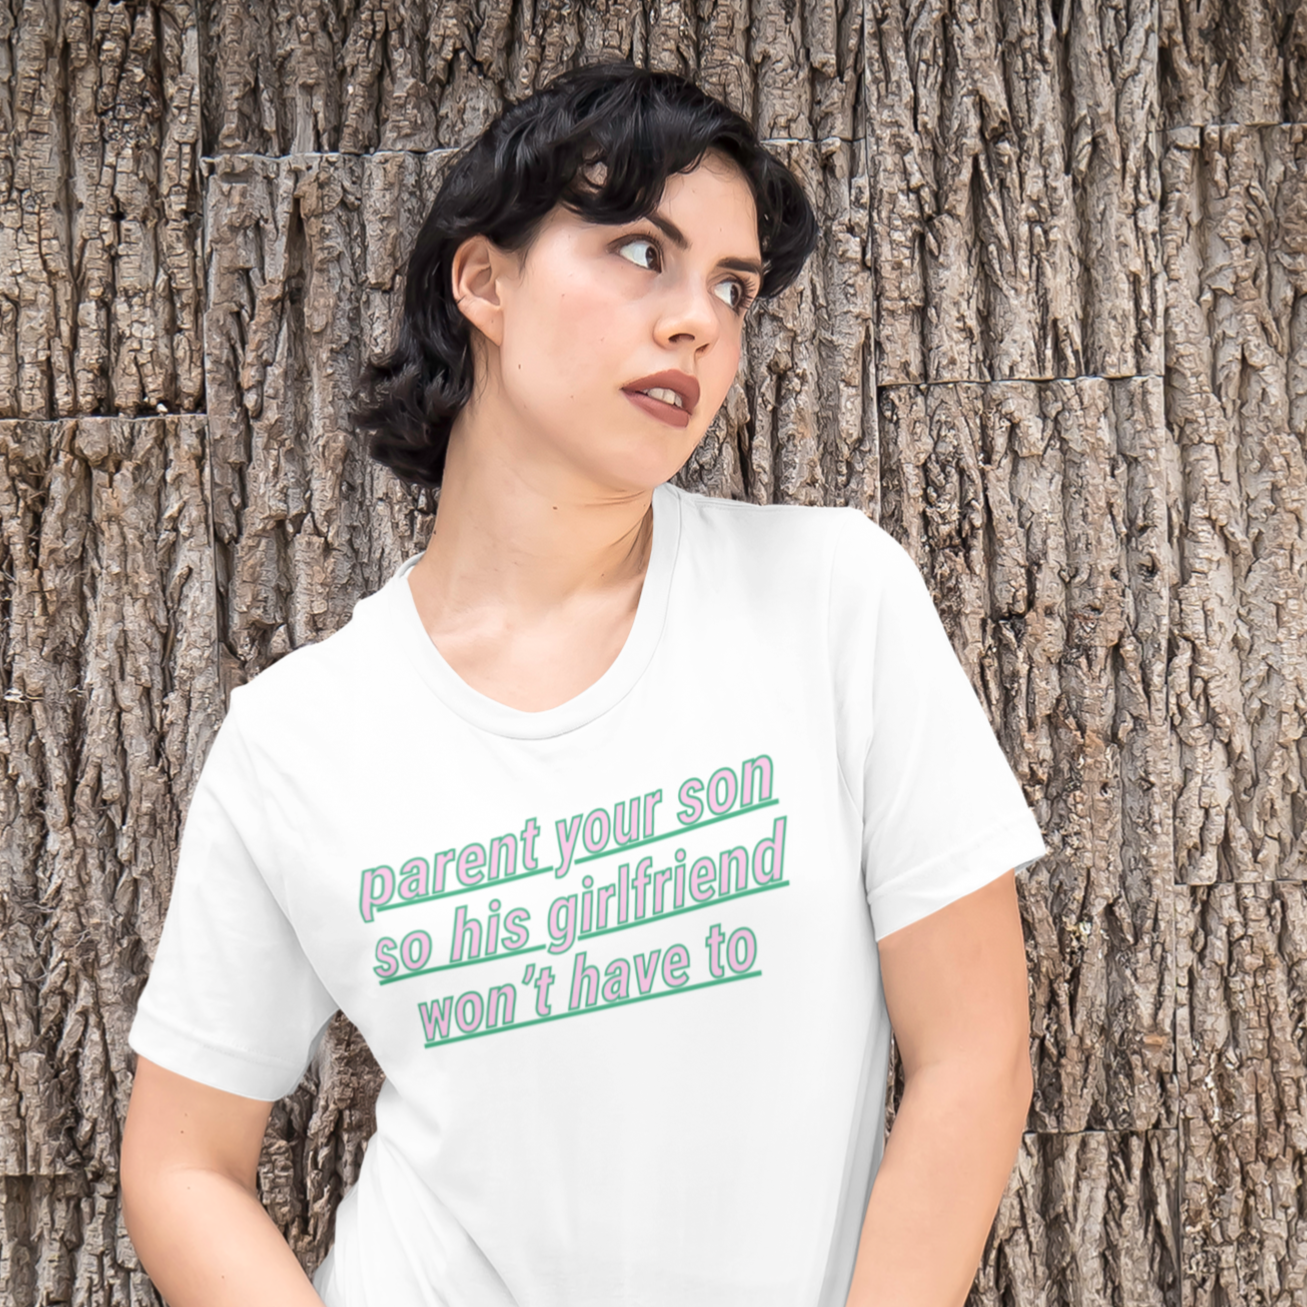 Parent Your Son So His Girlfriend Won’t Have To Unisex Feminist t-shirt - Shop Women’s Rights T-shirts - Feminist Trash Store